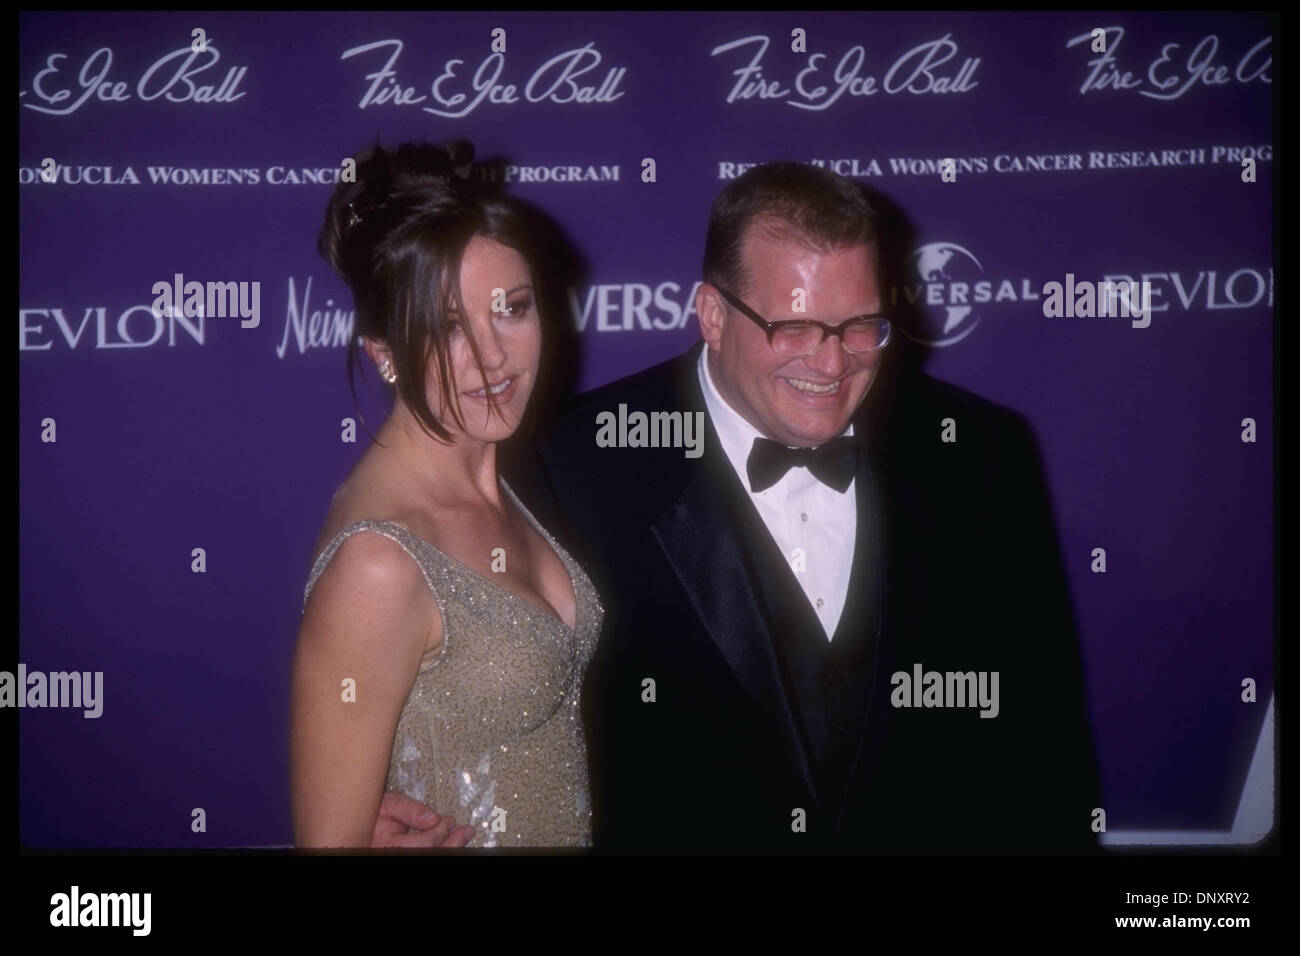 December 10, 1998; Hollywood, CA, USA; DREW CAREY and CHRISTA MILLER attend the Fire & Ice Ball. Mandatory Credit: Kathy Hutchins/ZUMA Press. (?) Kathy Hutchins Stock Photo